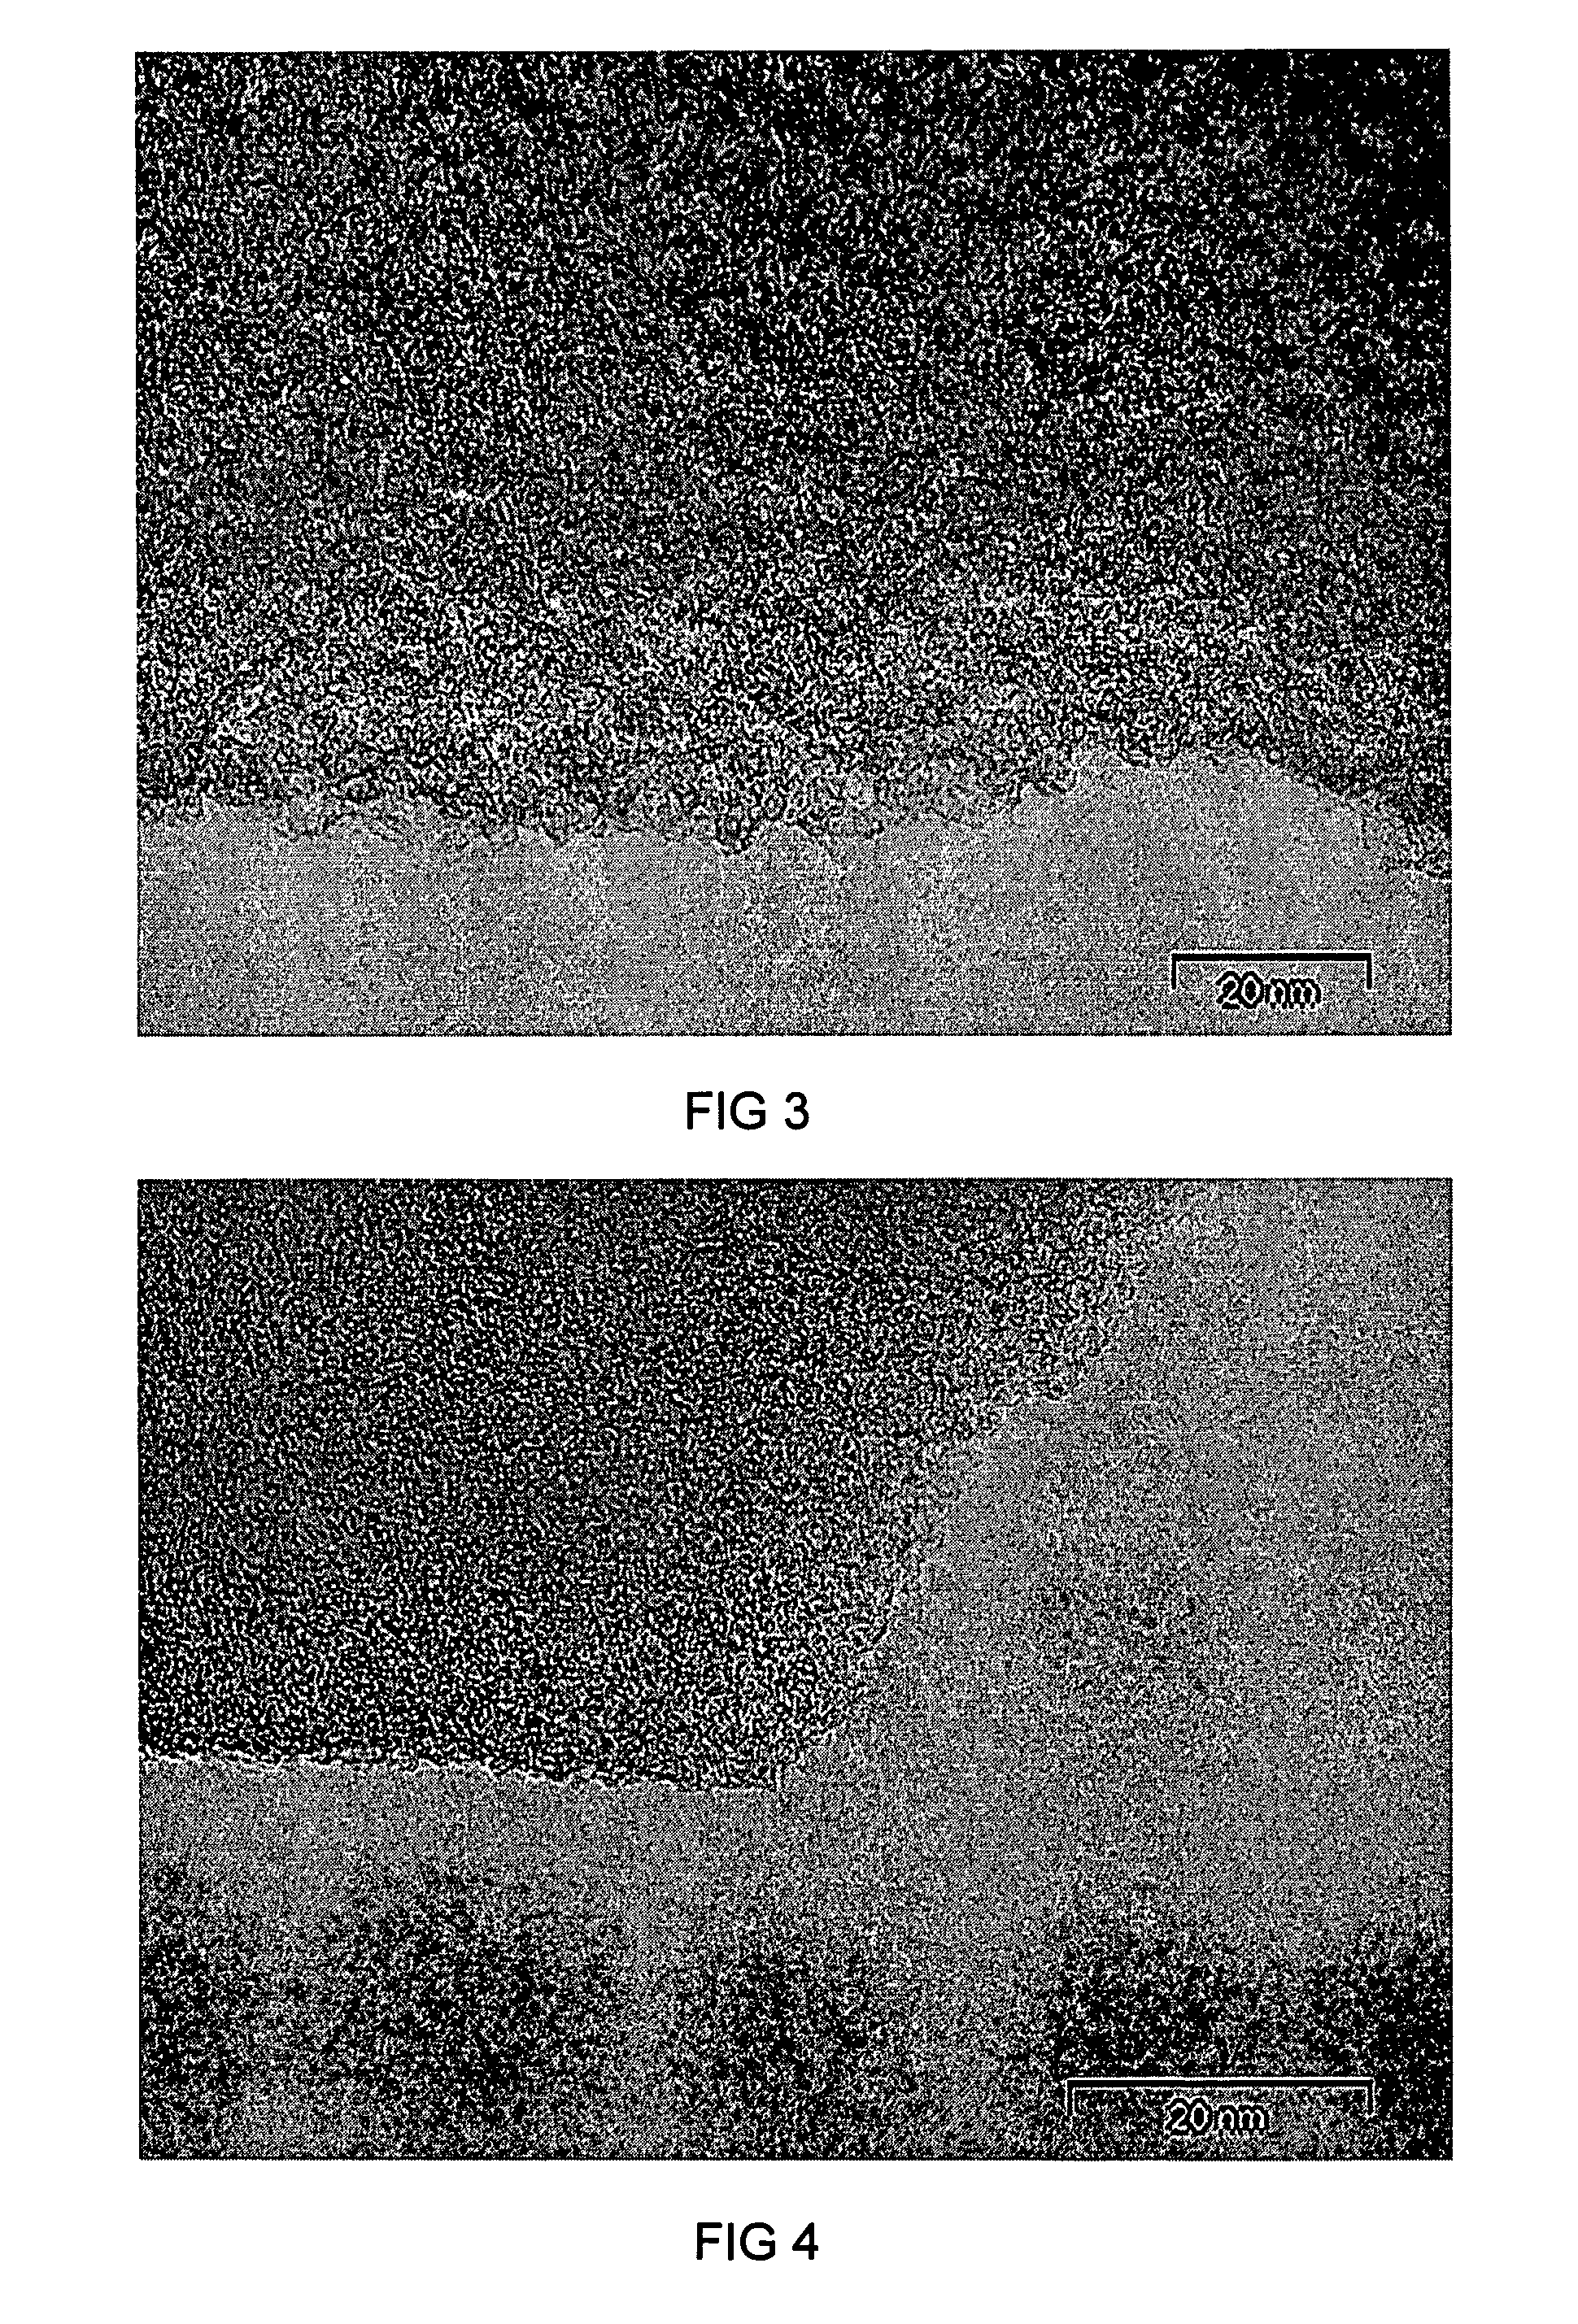 Method Of Making The Porous Carbon Material And Porous Carbon Materials Produced By The Method